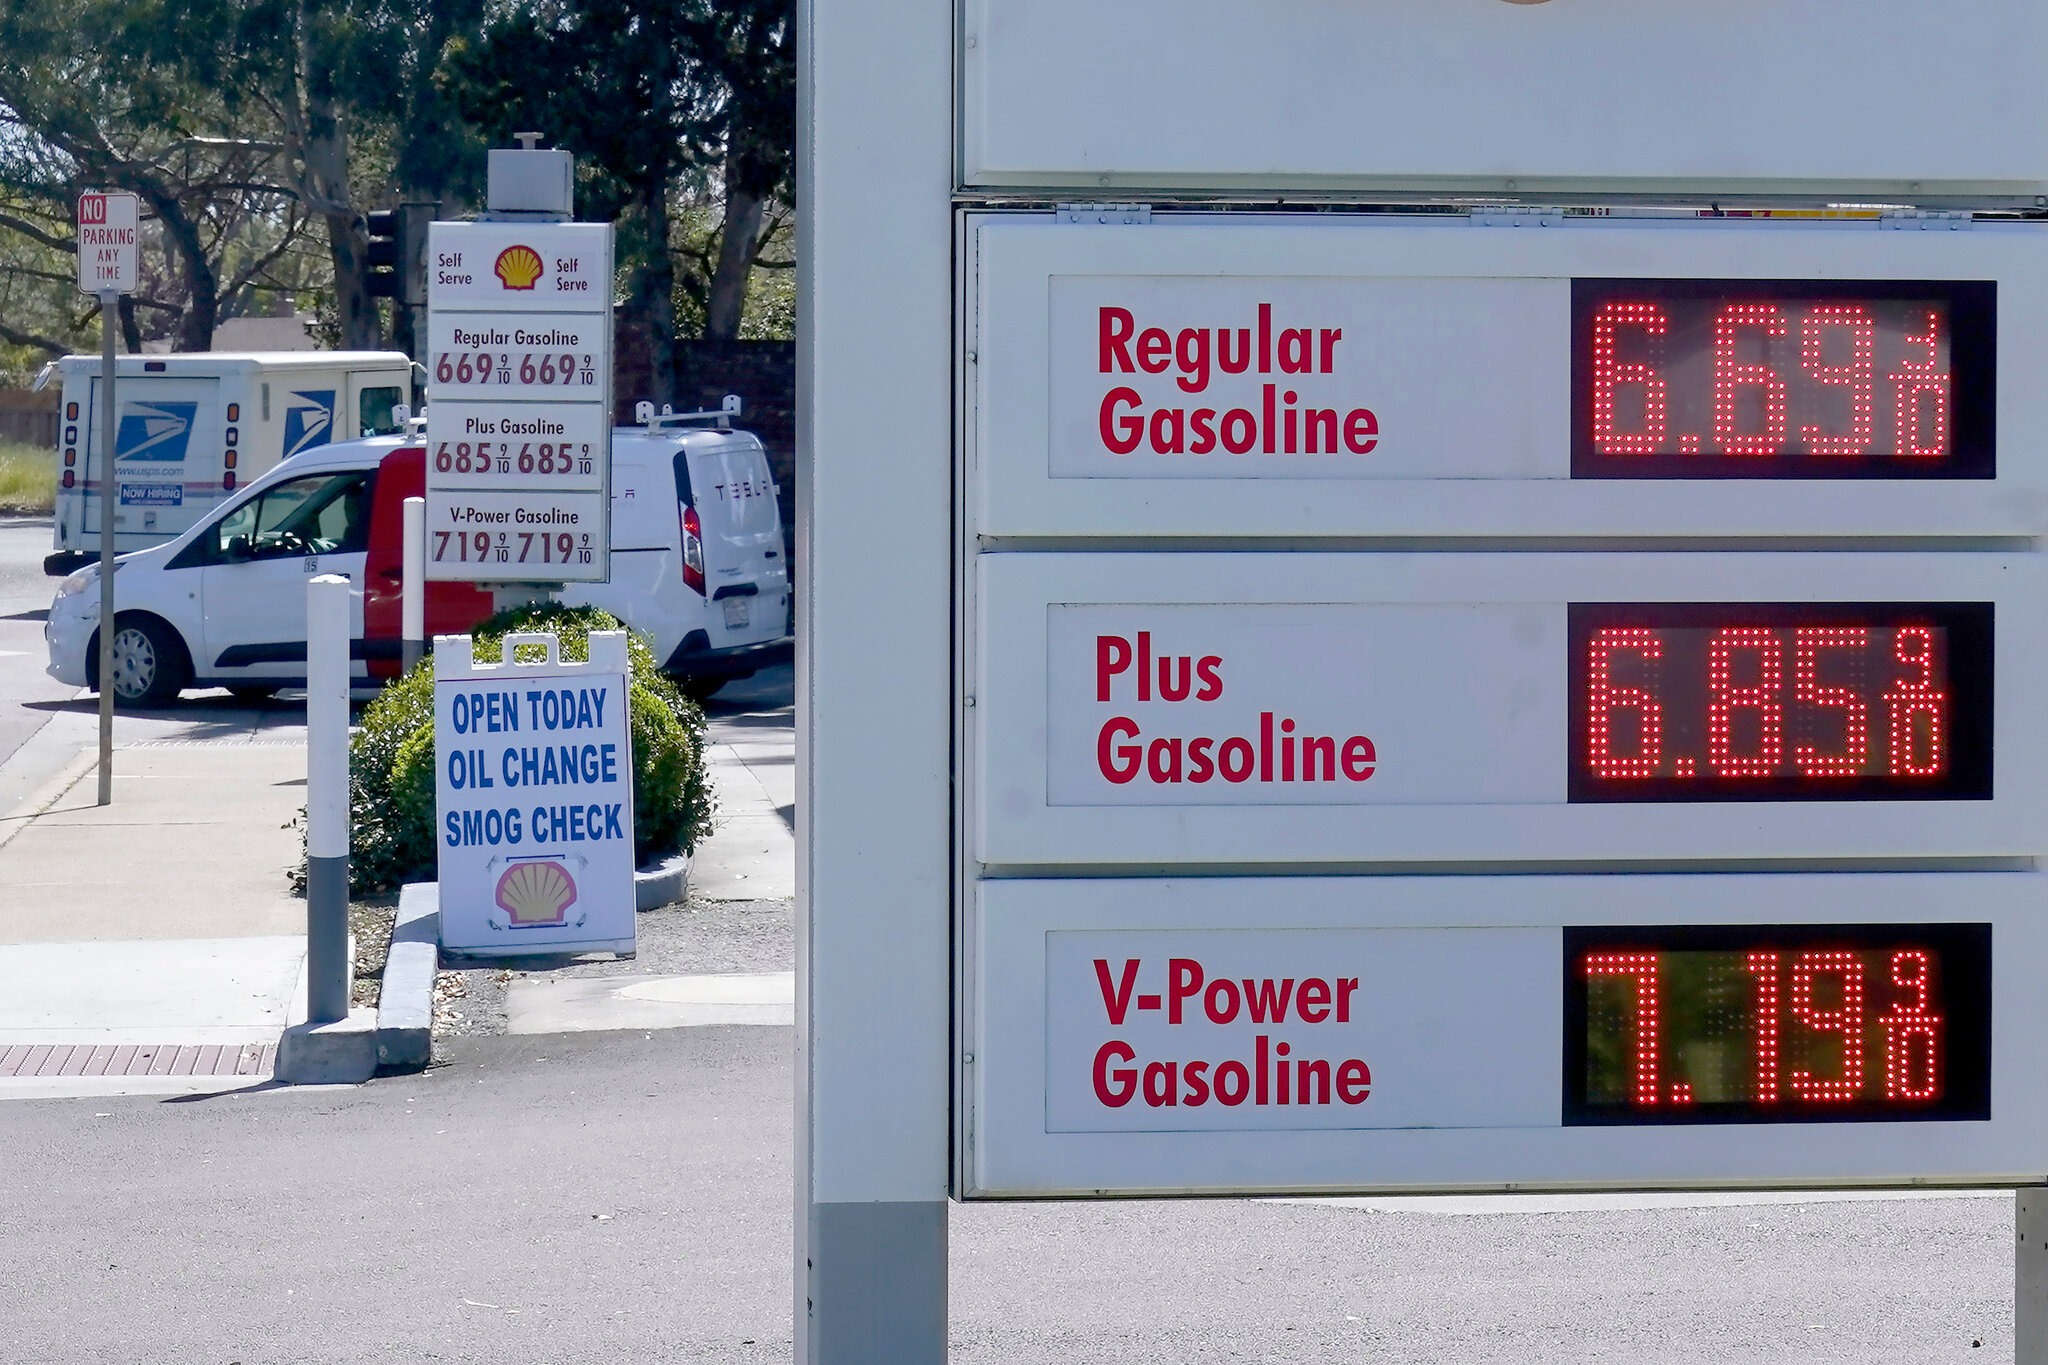 Sky-High Gas Prices Hit California: What's Driving Up Costs at the Pump?